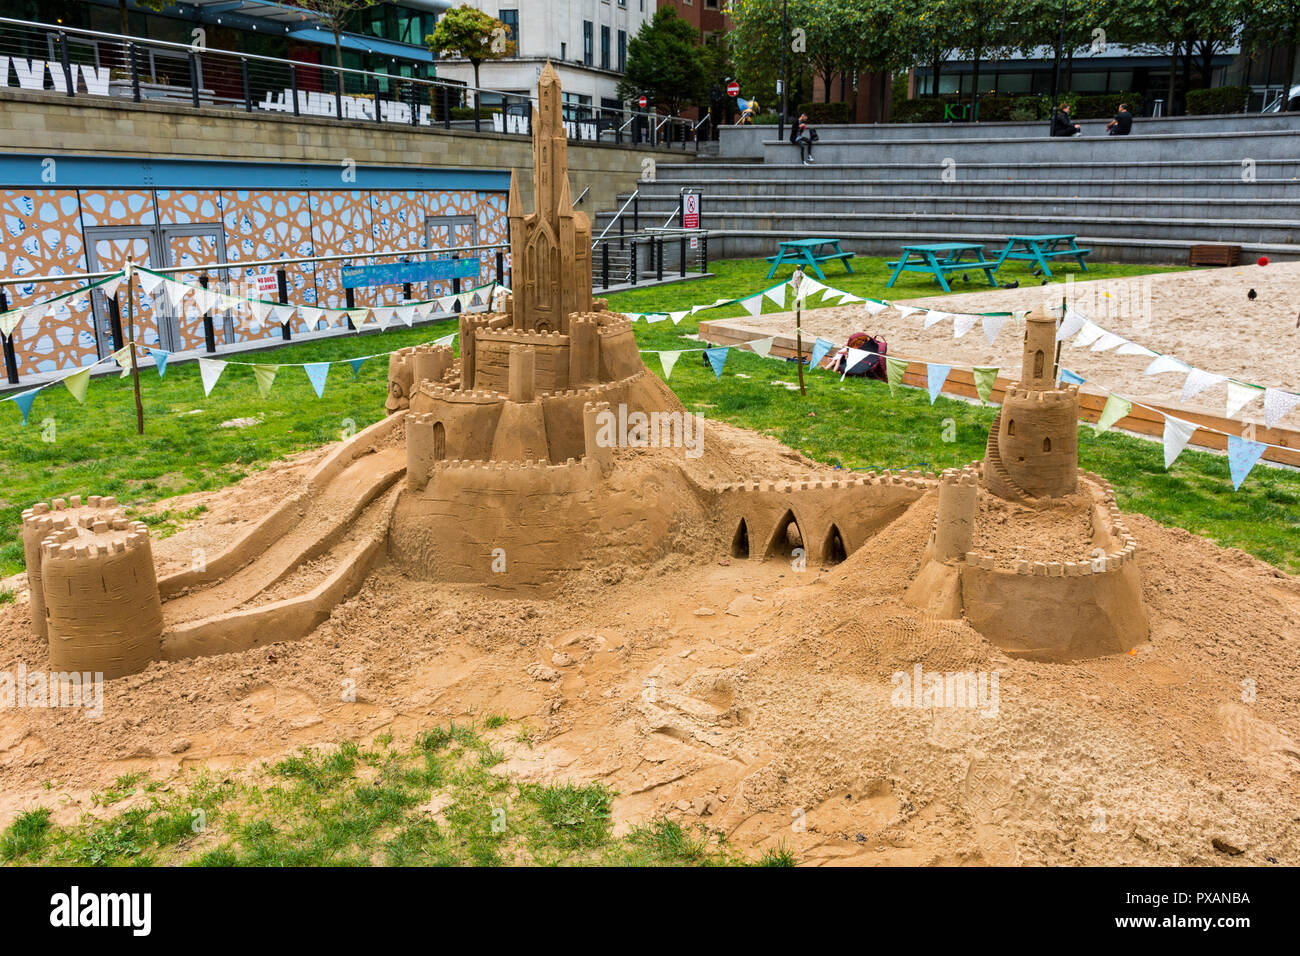 Sand castle display by #onthebeachMCR at Great Northern Square, Manchester, England, UK Stock Photo